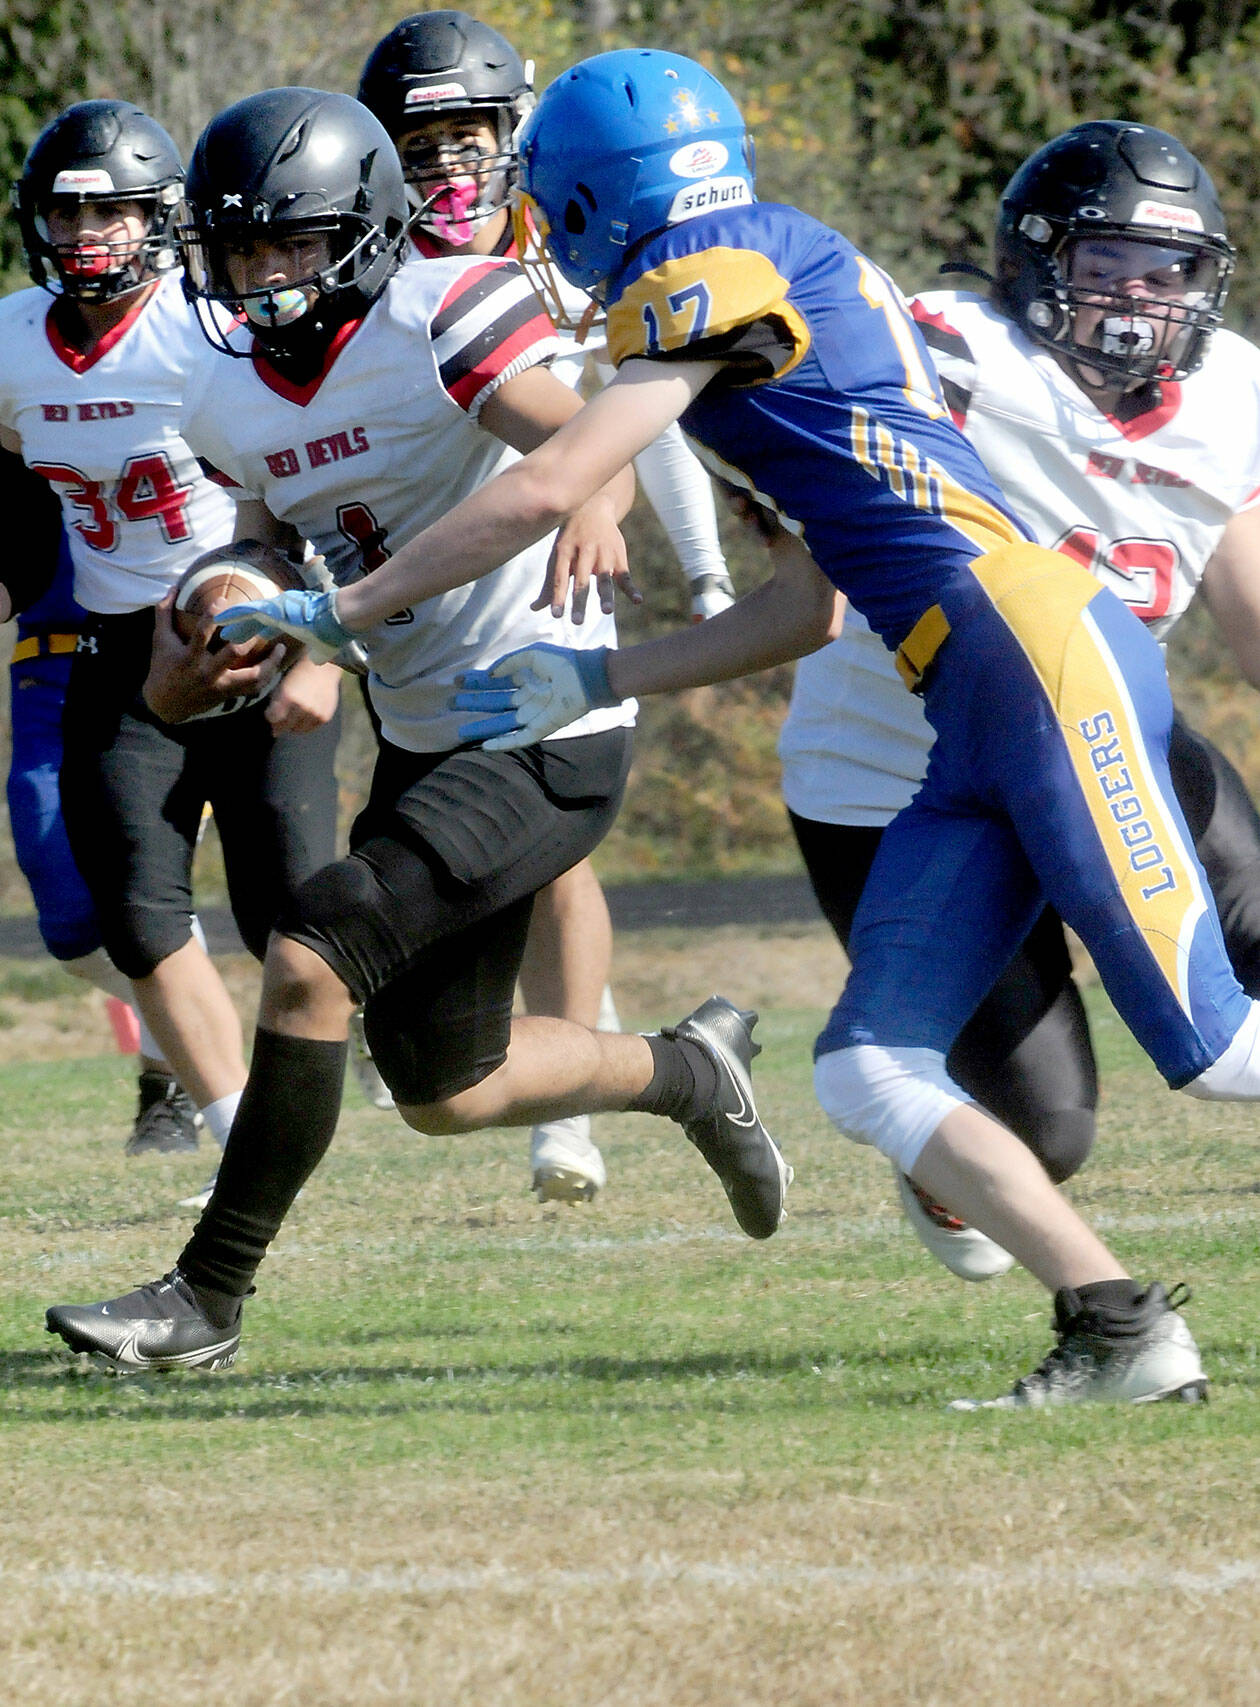 Neah Bay’s Jodell Wimberly, left, tries to evade the defense of Crescent’s Lucas Love on Saturday in Joyce. (Keith Thorpe/Peninsula Daily News)